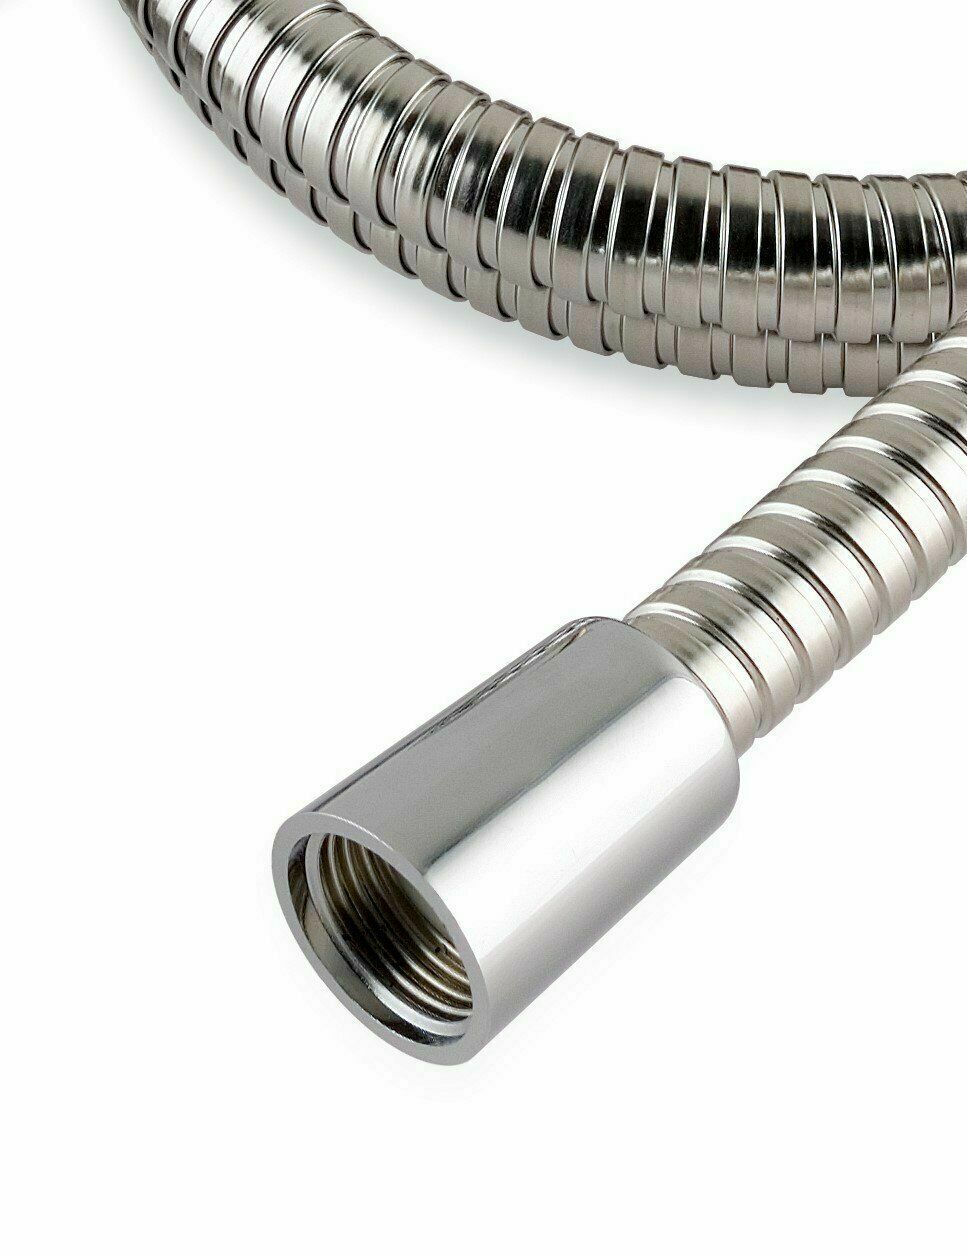 Stainless Steel 1.5m Hi Flow Double Interlock Shower Hose MX Group 1.5m Replace